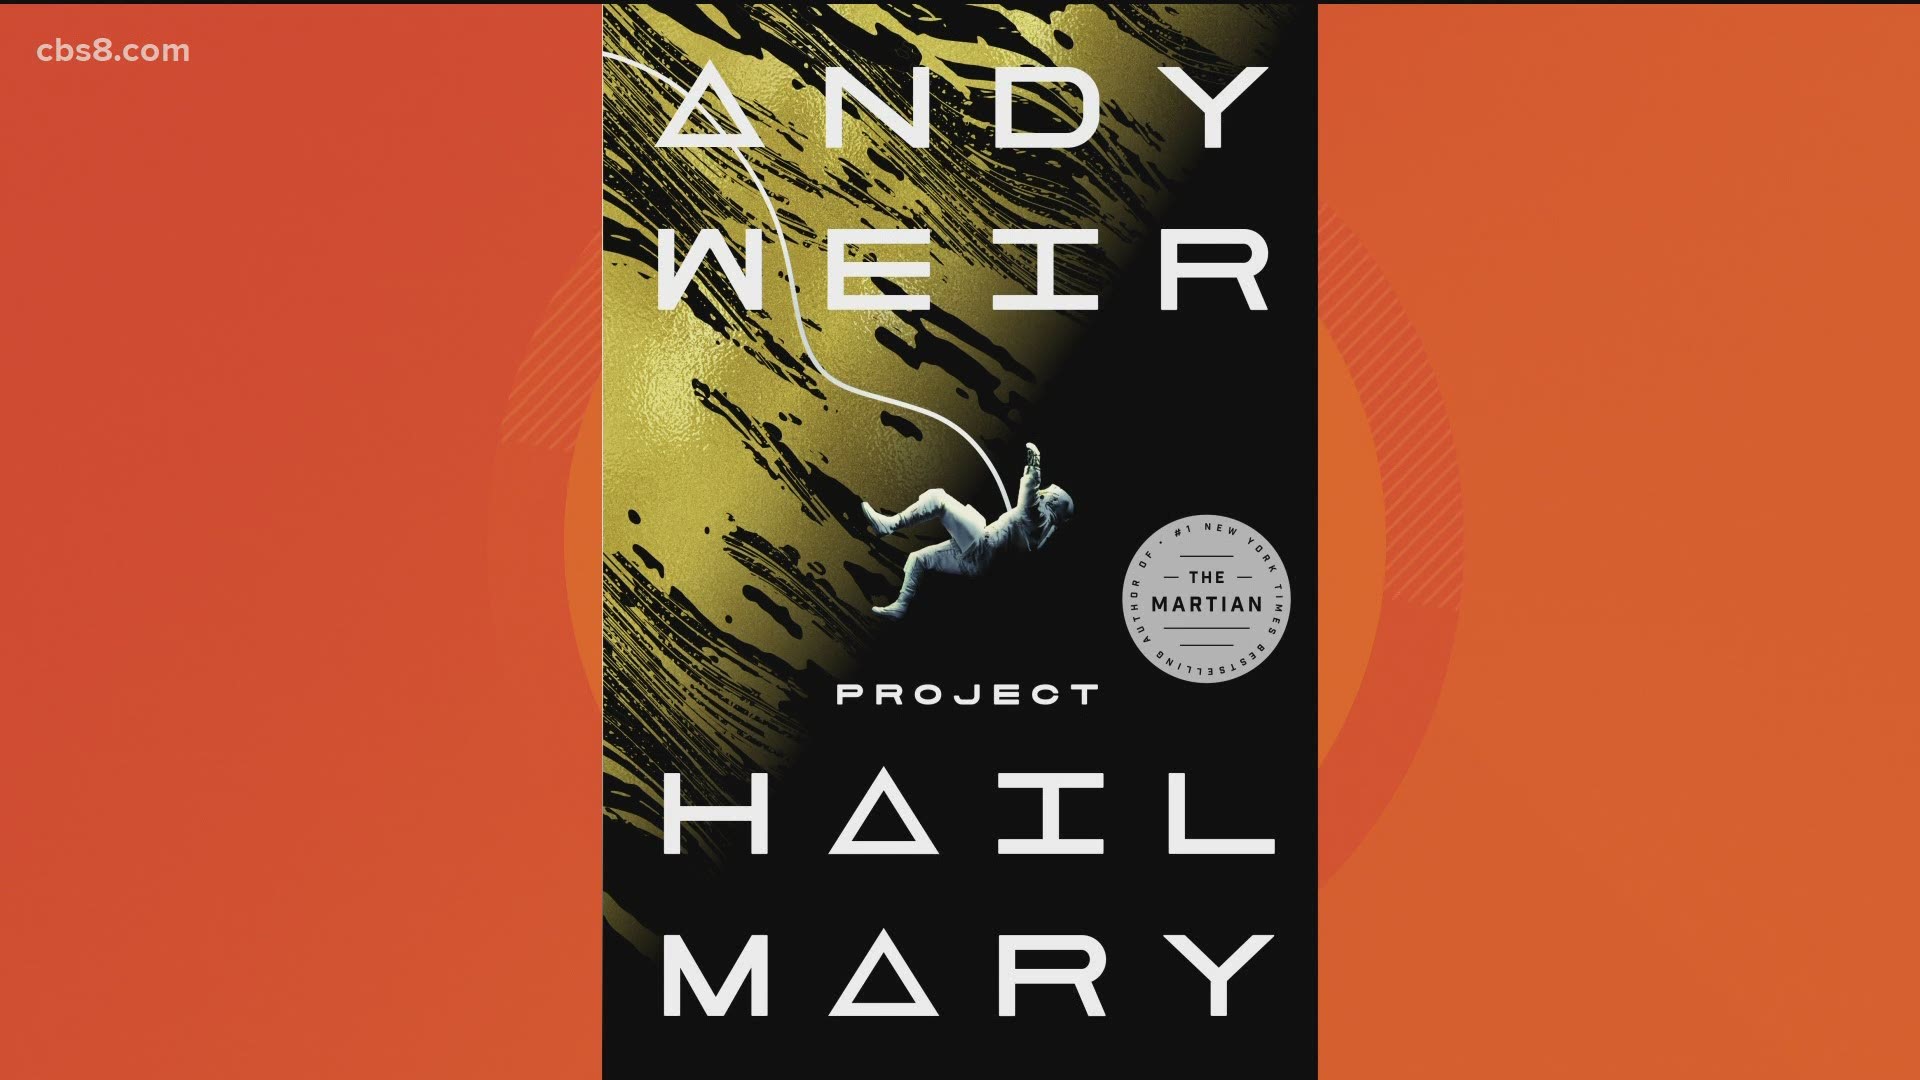 Author Andy Weir joined Morning Extra to talk about Project Hail Mary and how Tuesday's event will support the sciences in San Diego.